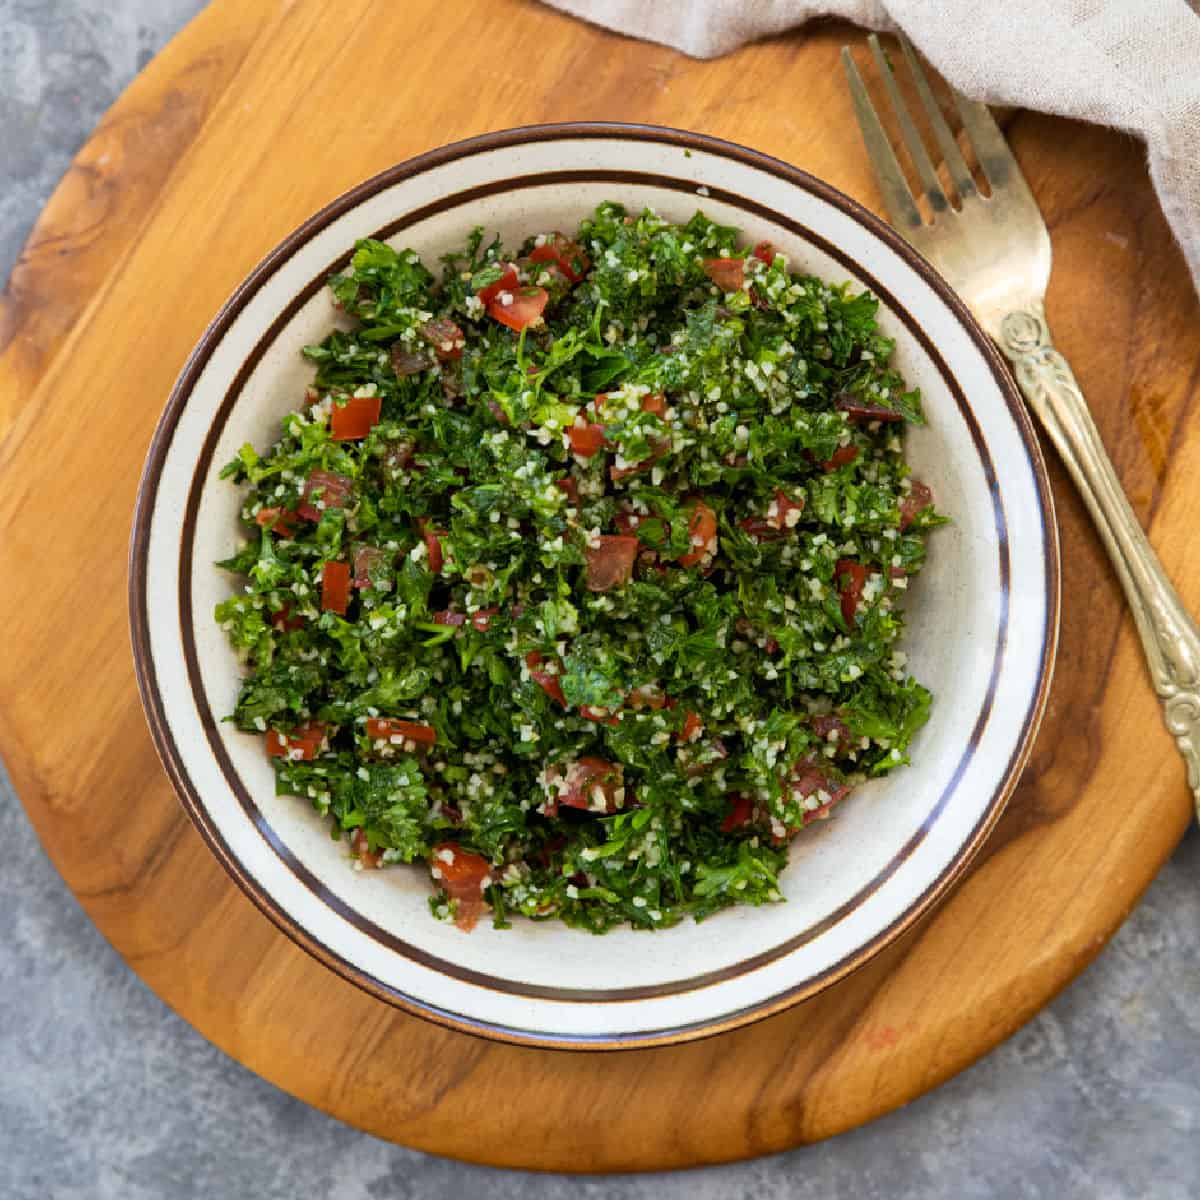 Tabouli, also known as tabbouleh, is a beautiful Middle Eastern salad that's very simple to make. Fresh tomatoes, and finely chopped herbs, mixed with bulgur, lemon juice, and olive oil, are the ingredients of this simple yet delicious salad. This salad is ready in 20 minutes.